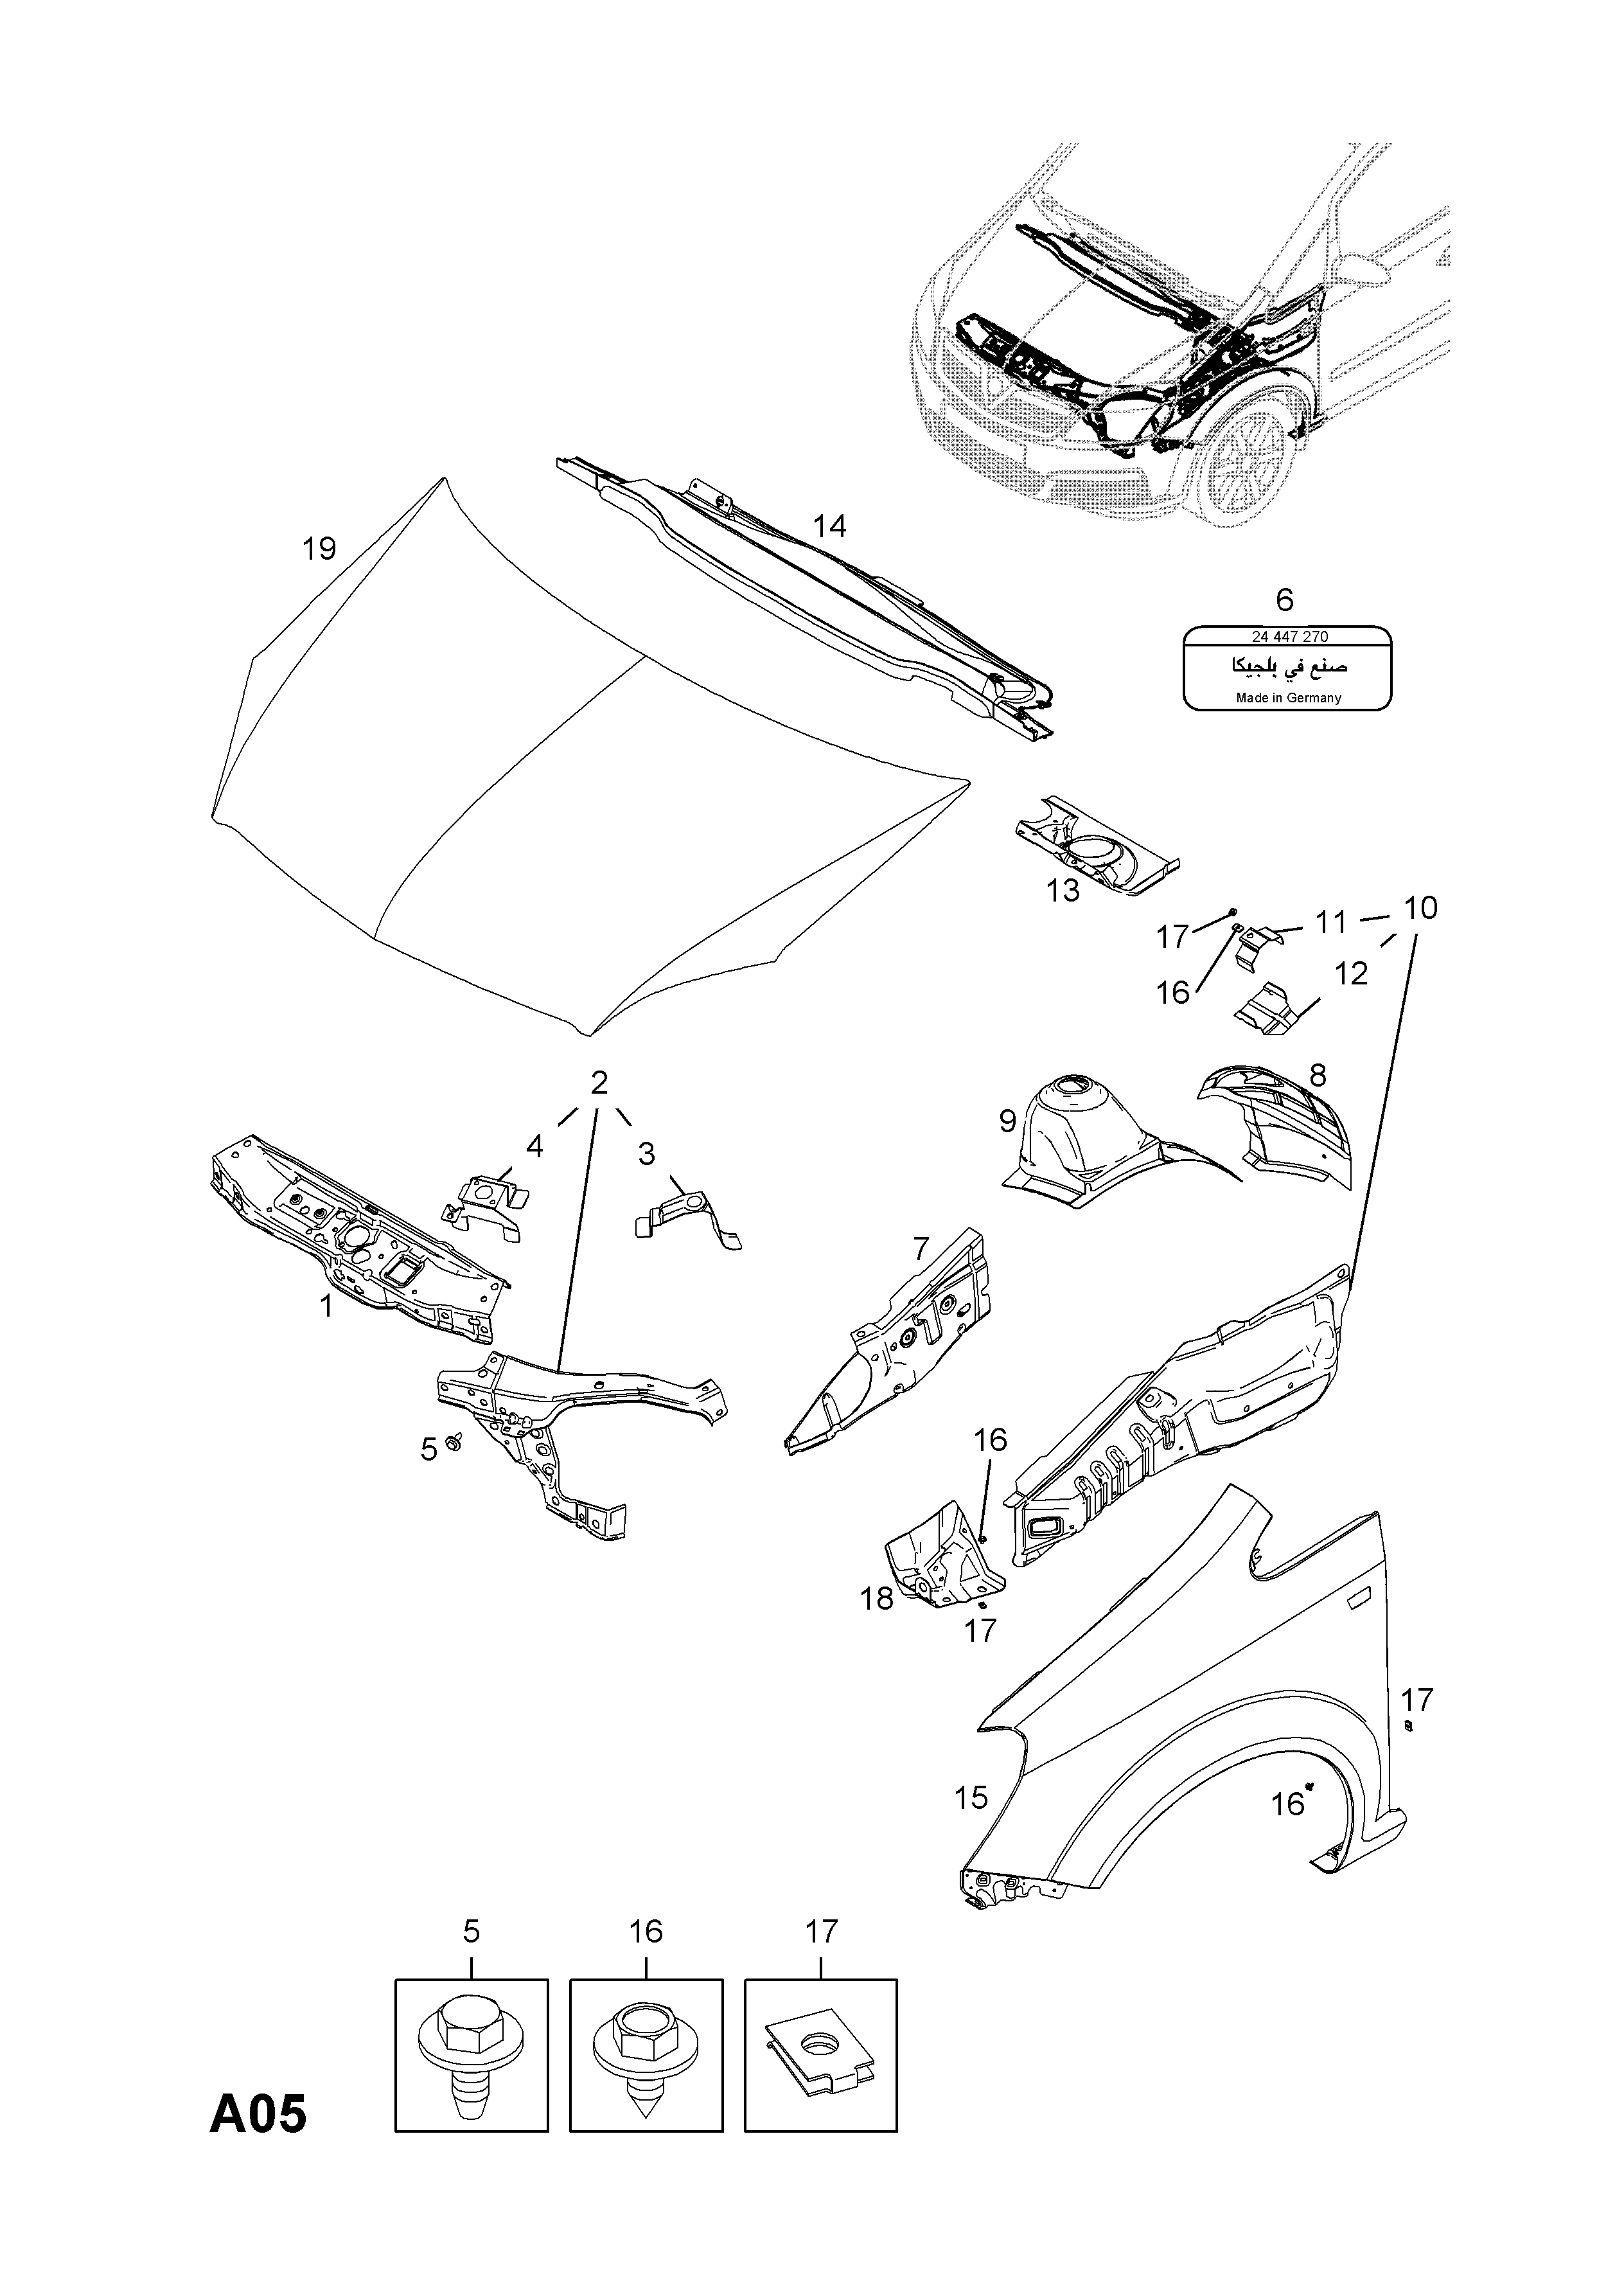 BONNET HINGE <small><i>[PLEASE REFER TO GROUP C (BONNET FITTINGS) (SHORTCUT: A05.C12)]</i></small>